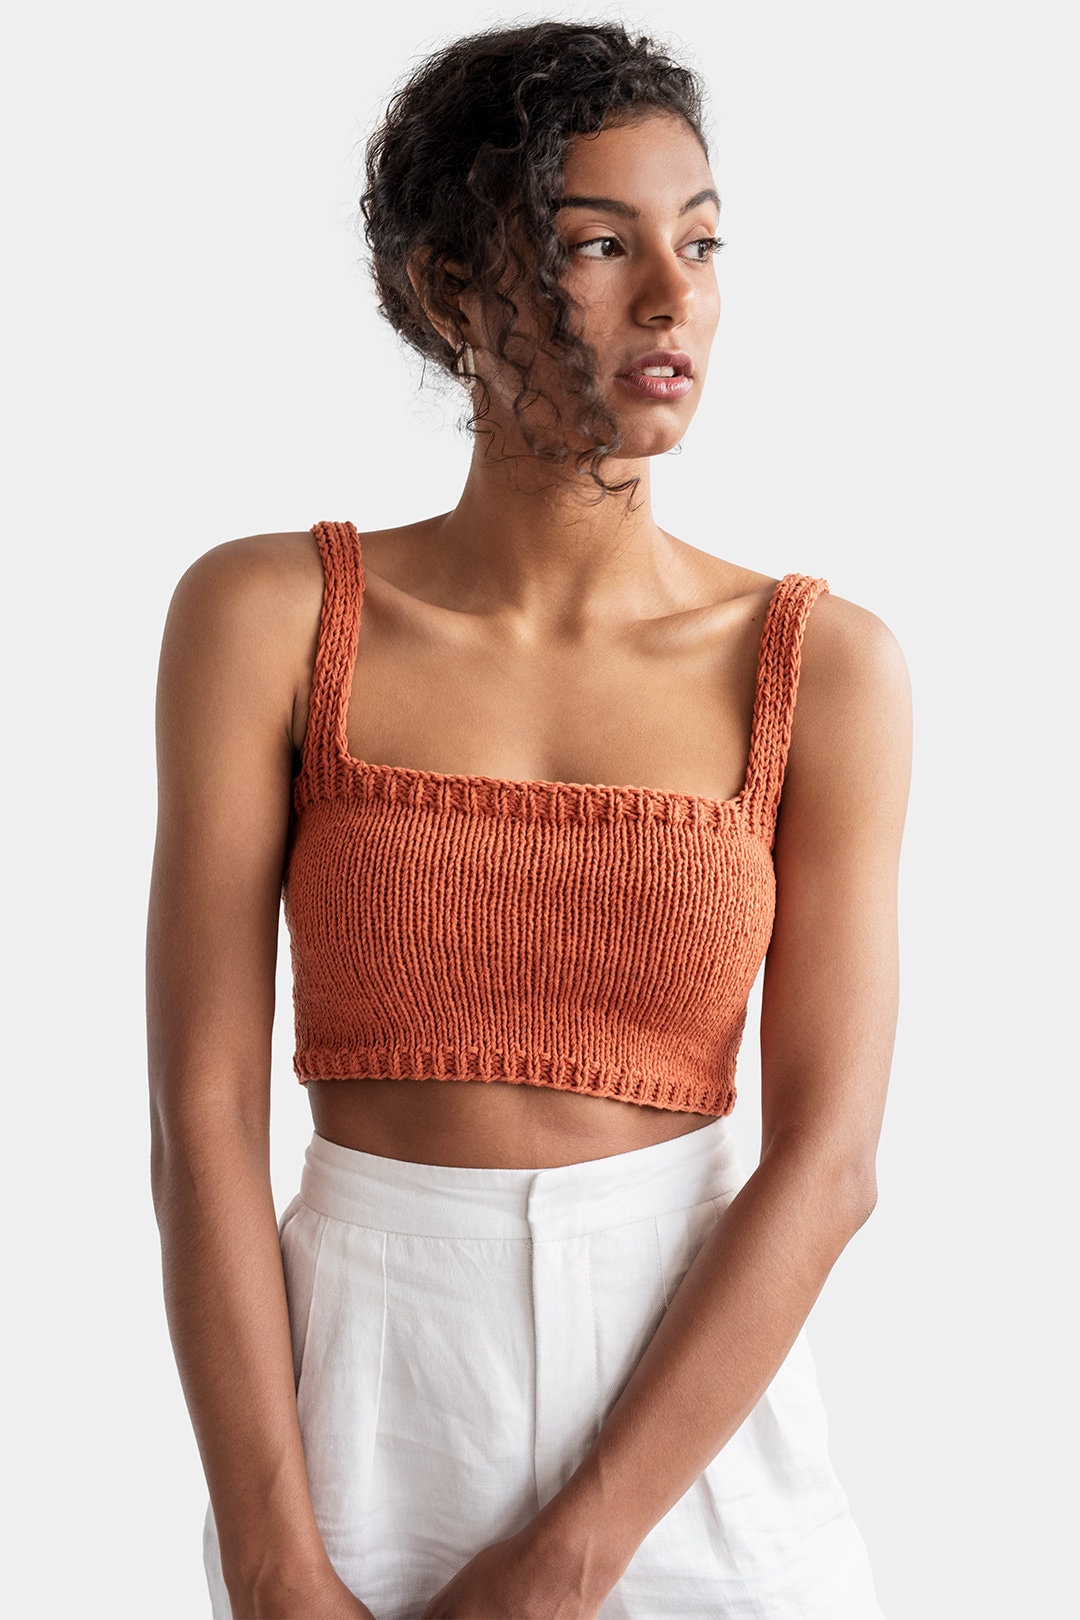 Square Neck Crop Top, Minimal Knit Top, Cropped Yoga Top, Hand Knit, Square  Neckline,sports Knit Bra, Fitted Cotton Bralette in Terra Cotta -   Norway